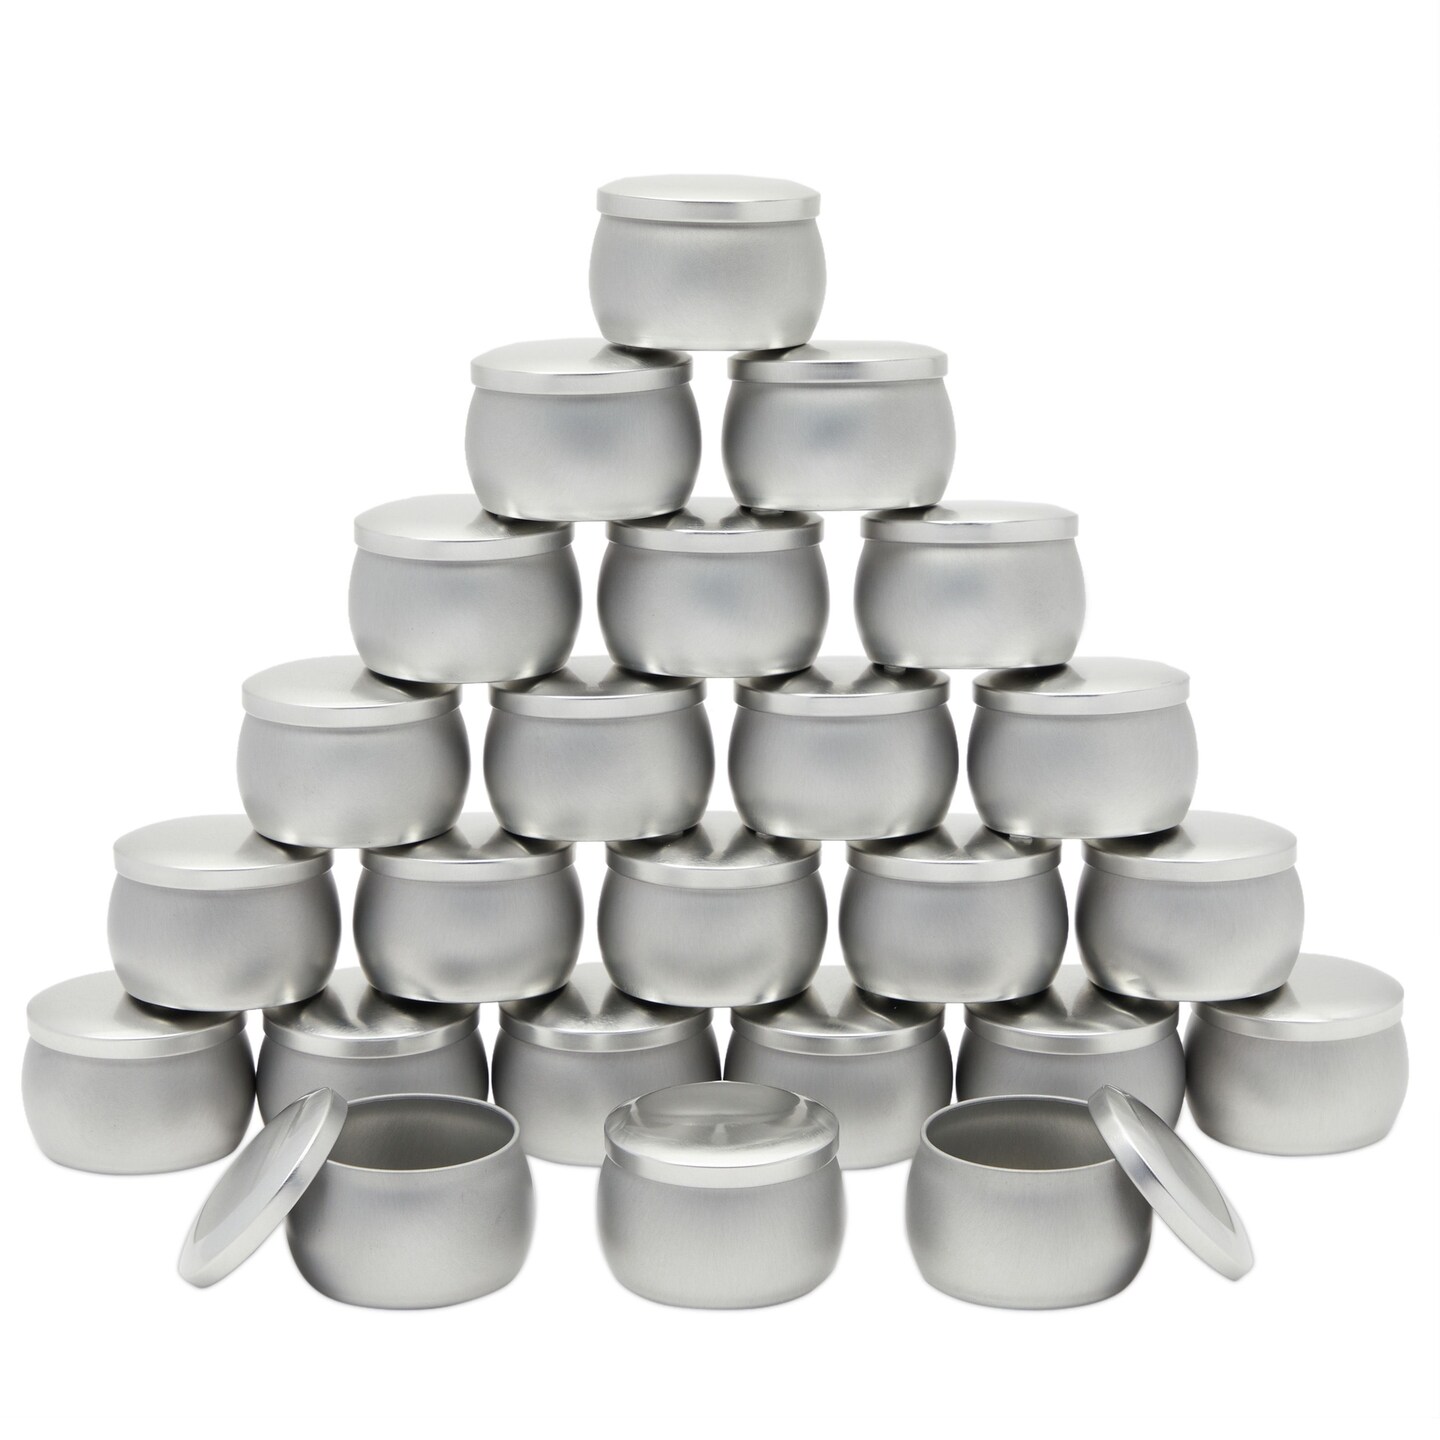 Mimi Pack 4 oz Silver Tins 24 Pack of Shallow Screw Top Round Tin  Containers with Lids for Cosmetics, Party Favors, Gifts